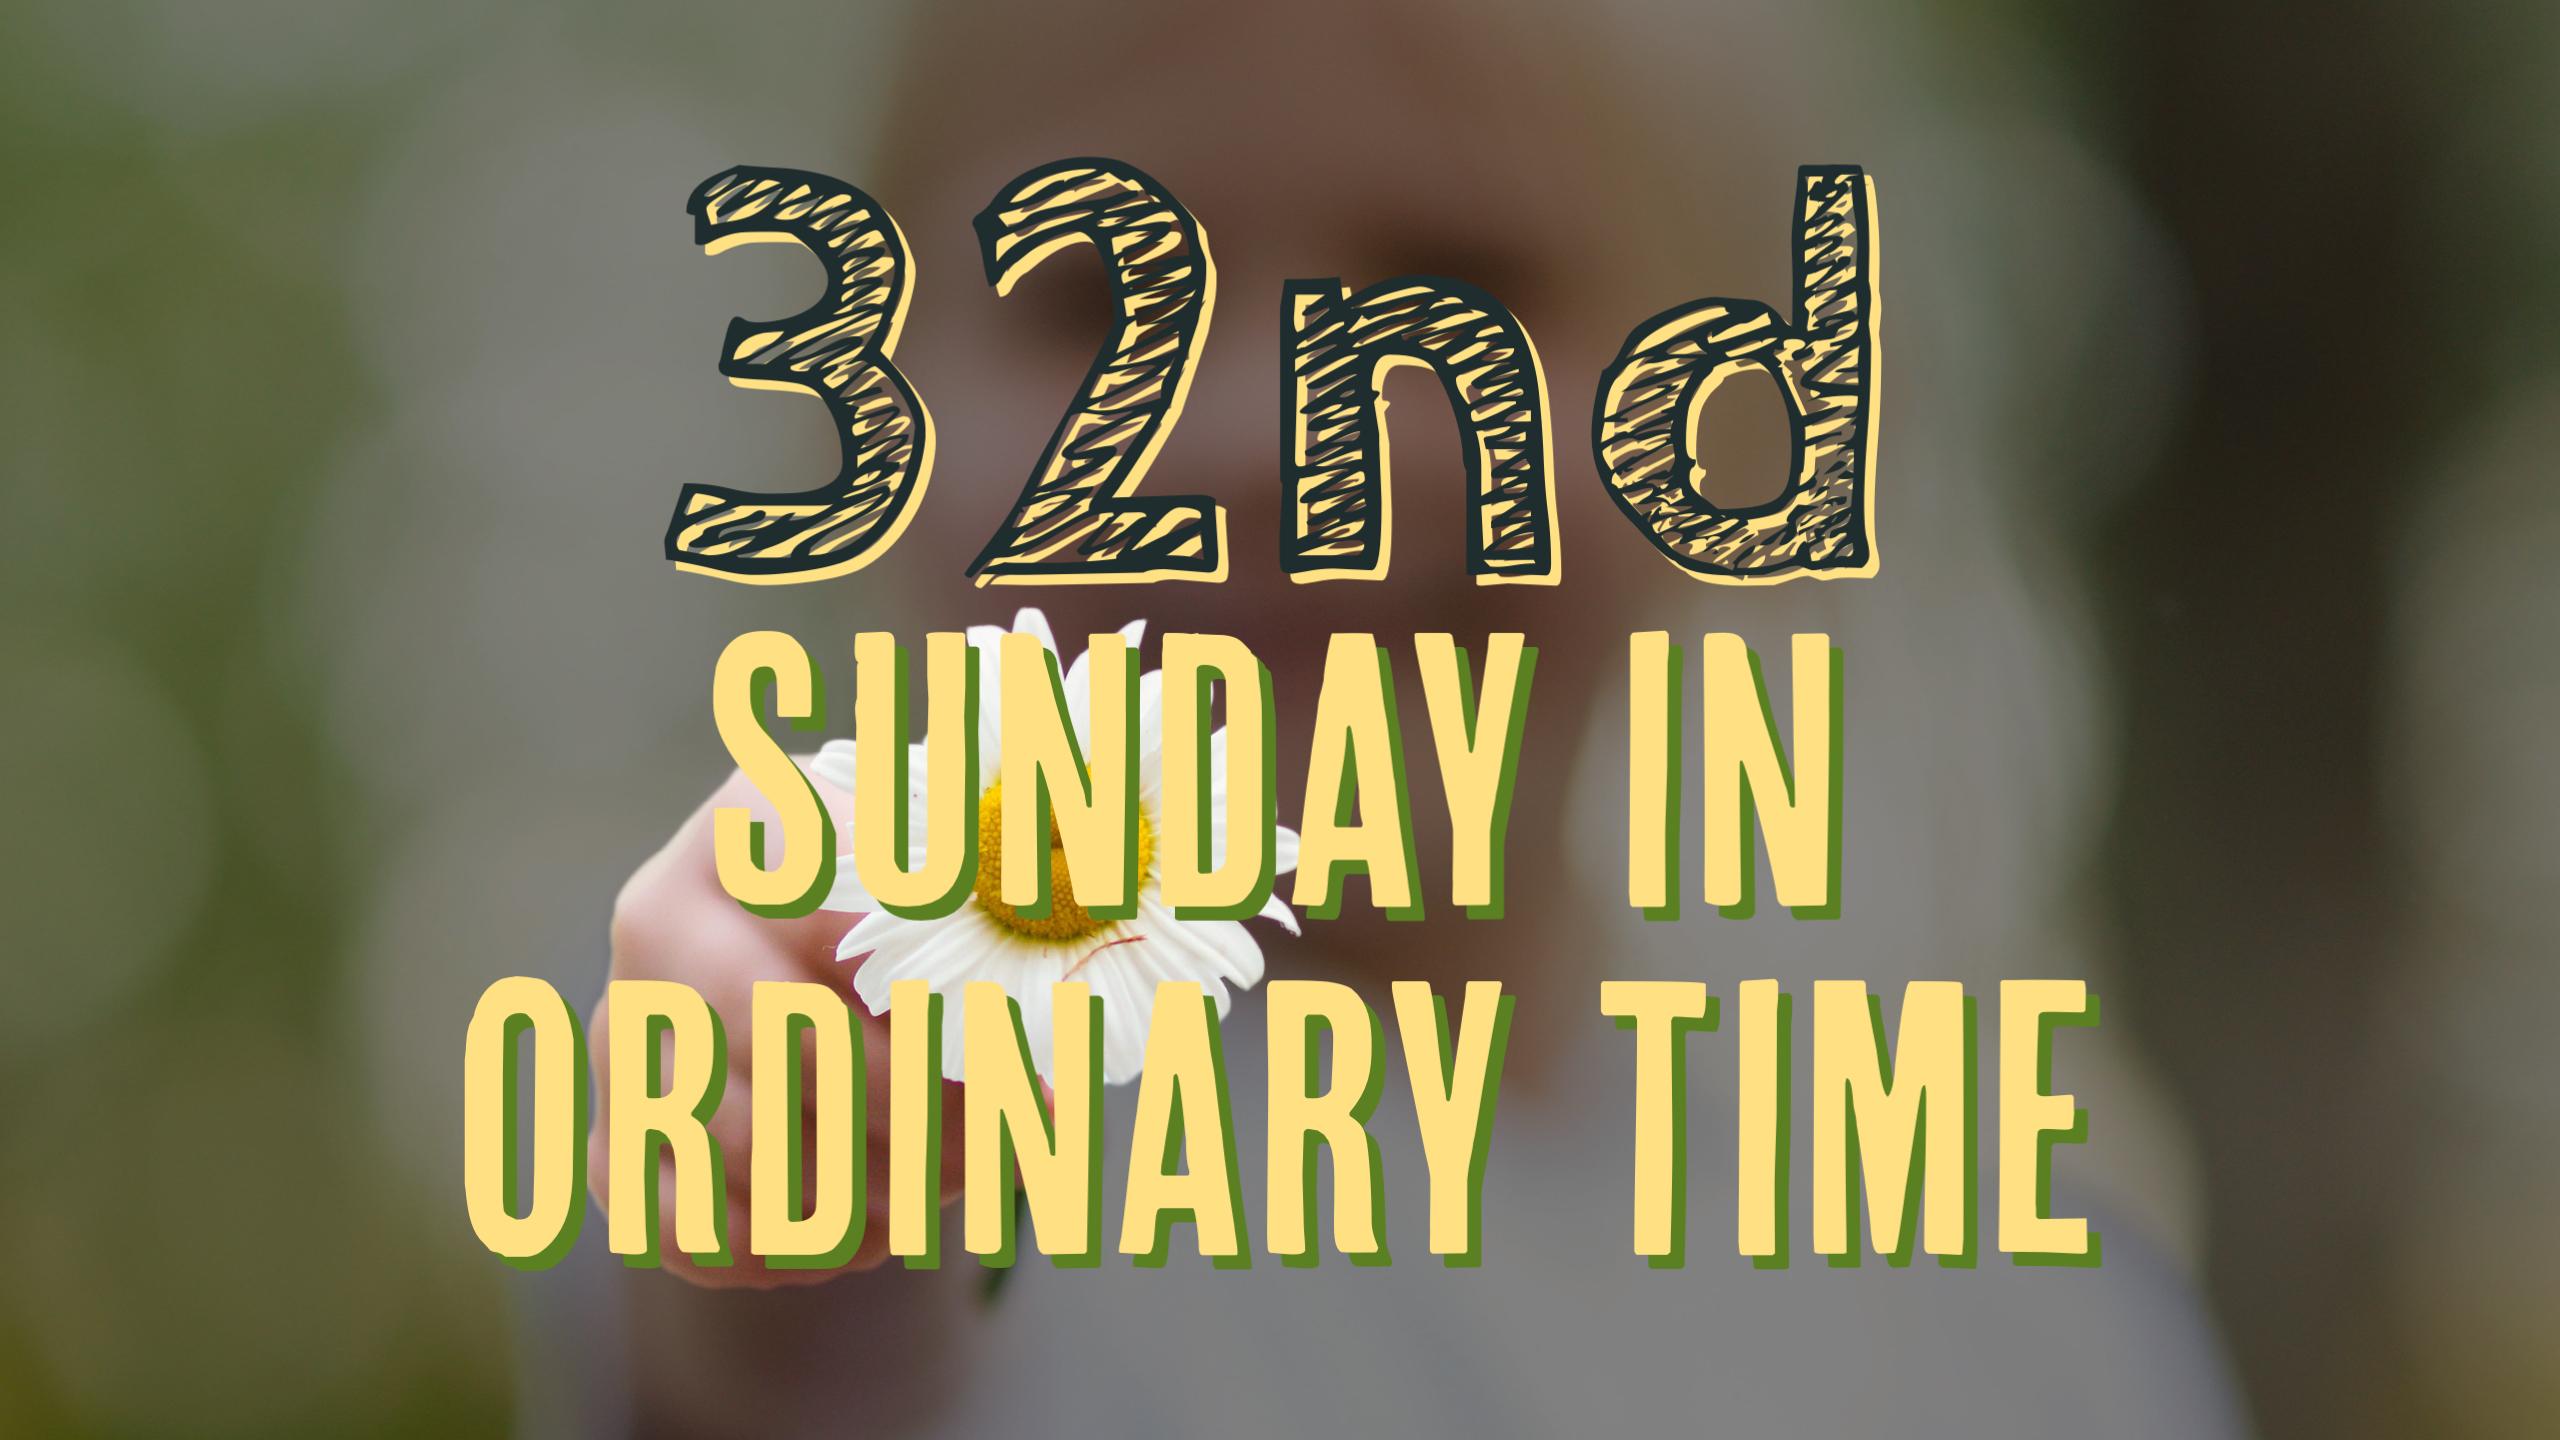 32nd Sunday in Ordinary Time